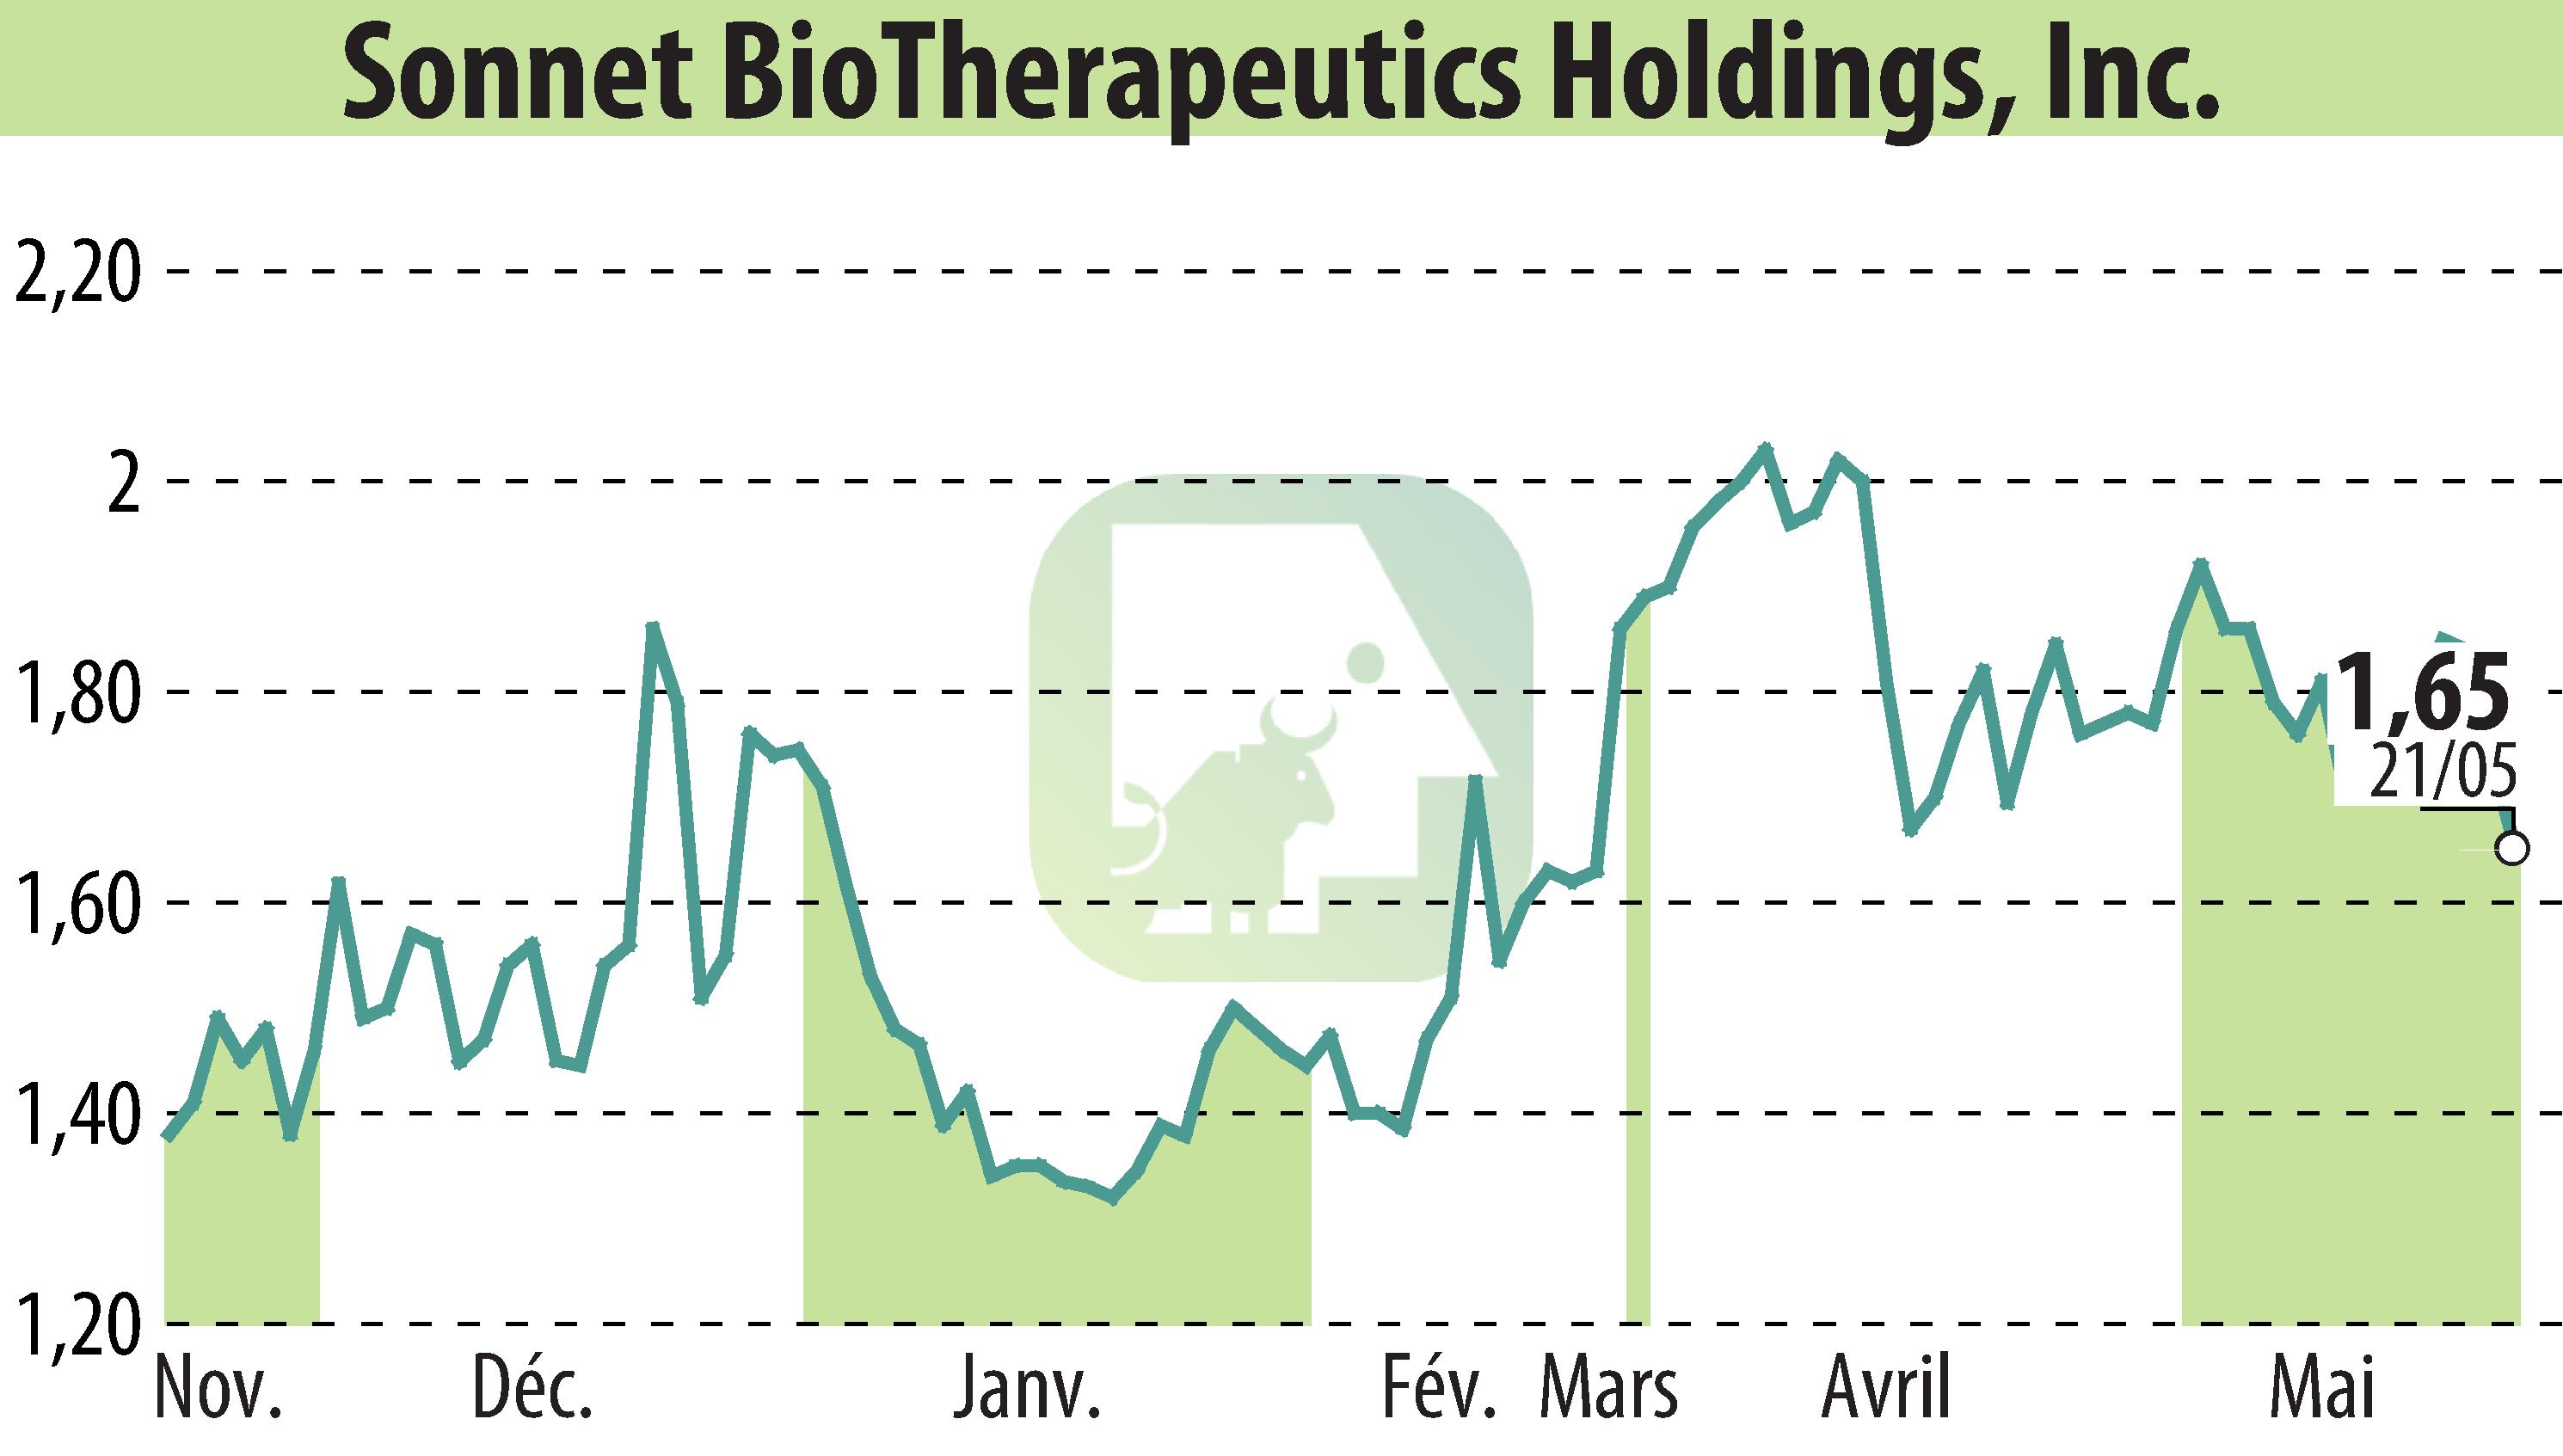 Stock price chart of Sonnet BioTherapeutics, Inc. (EBR:SONN) showing fluctuations.